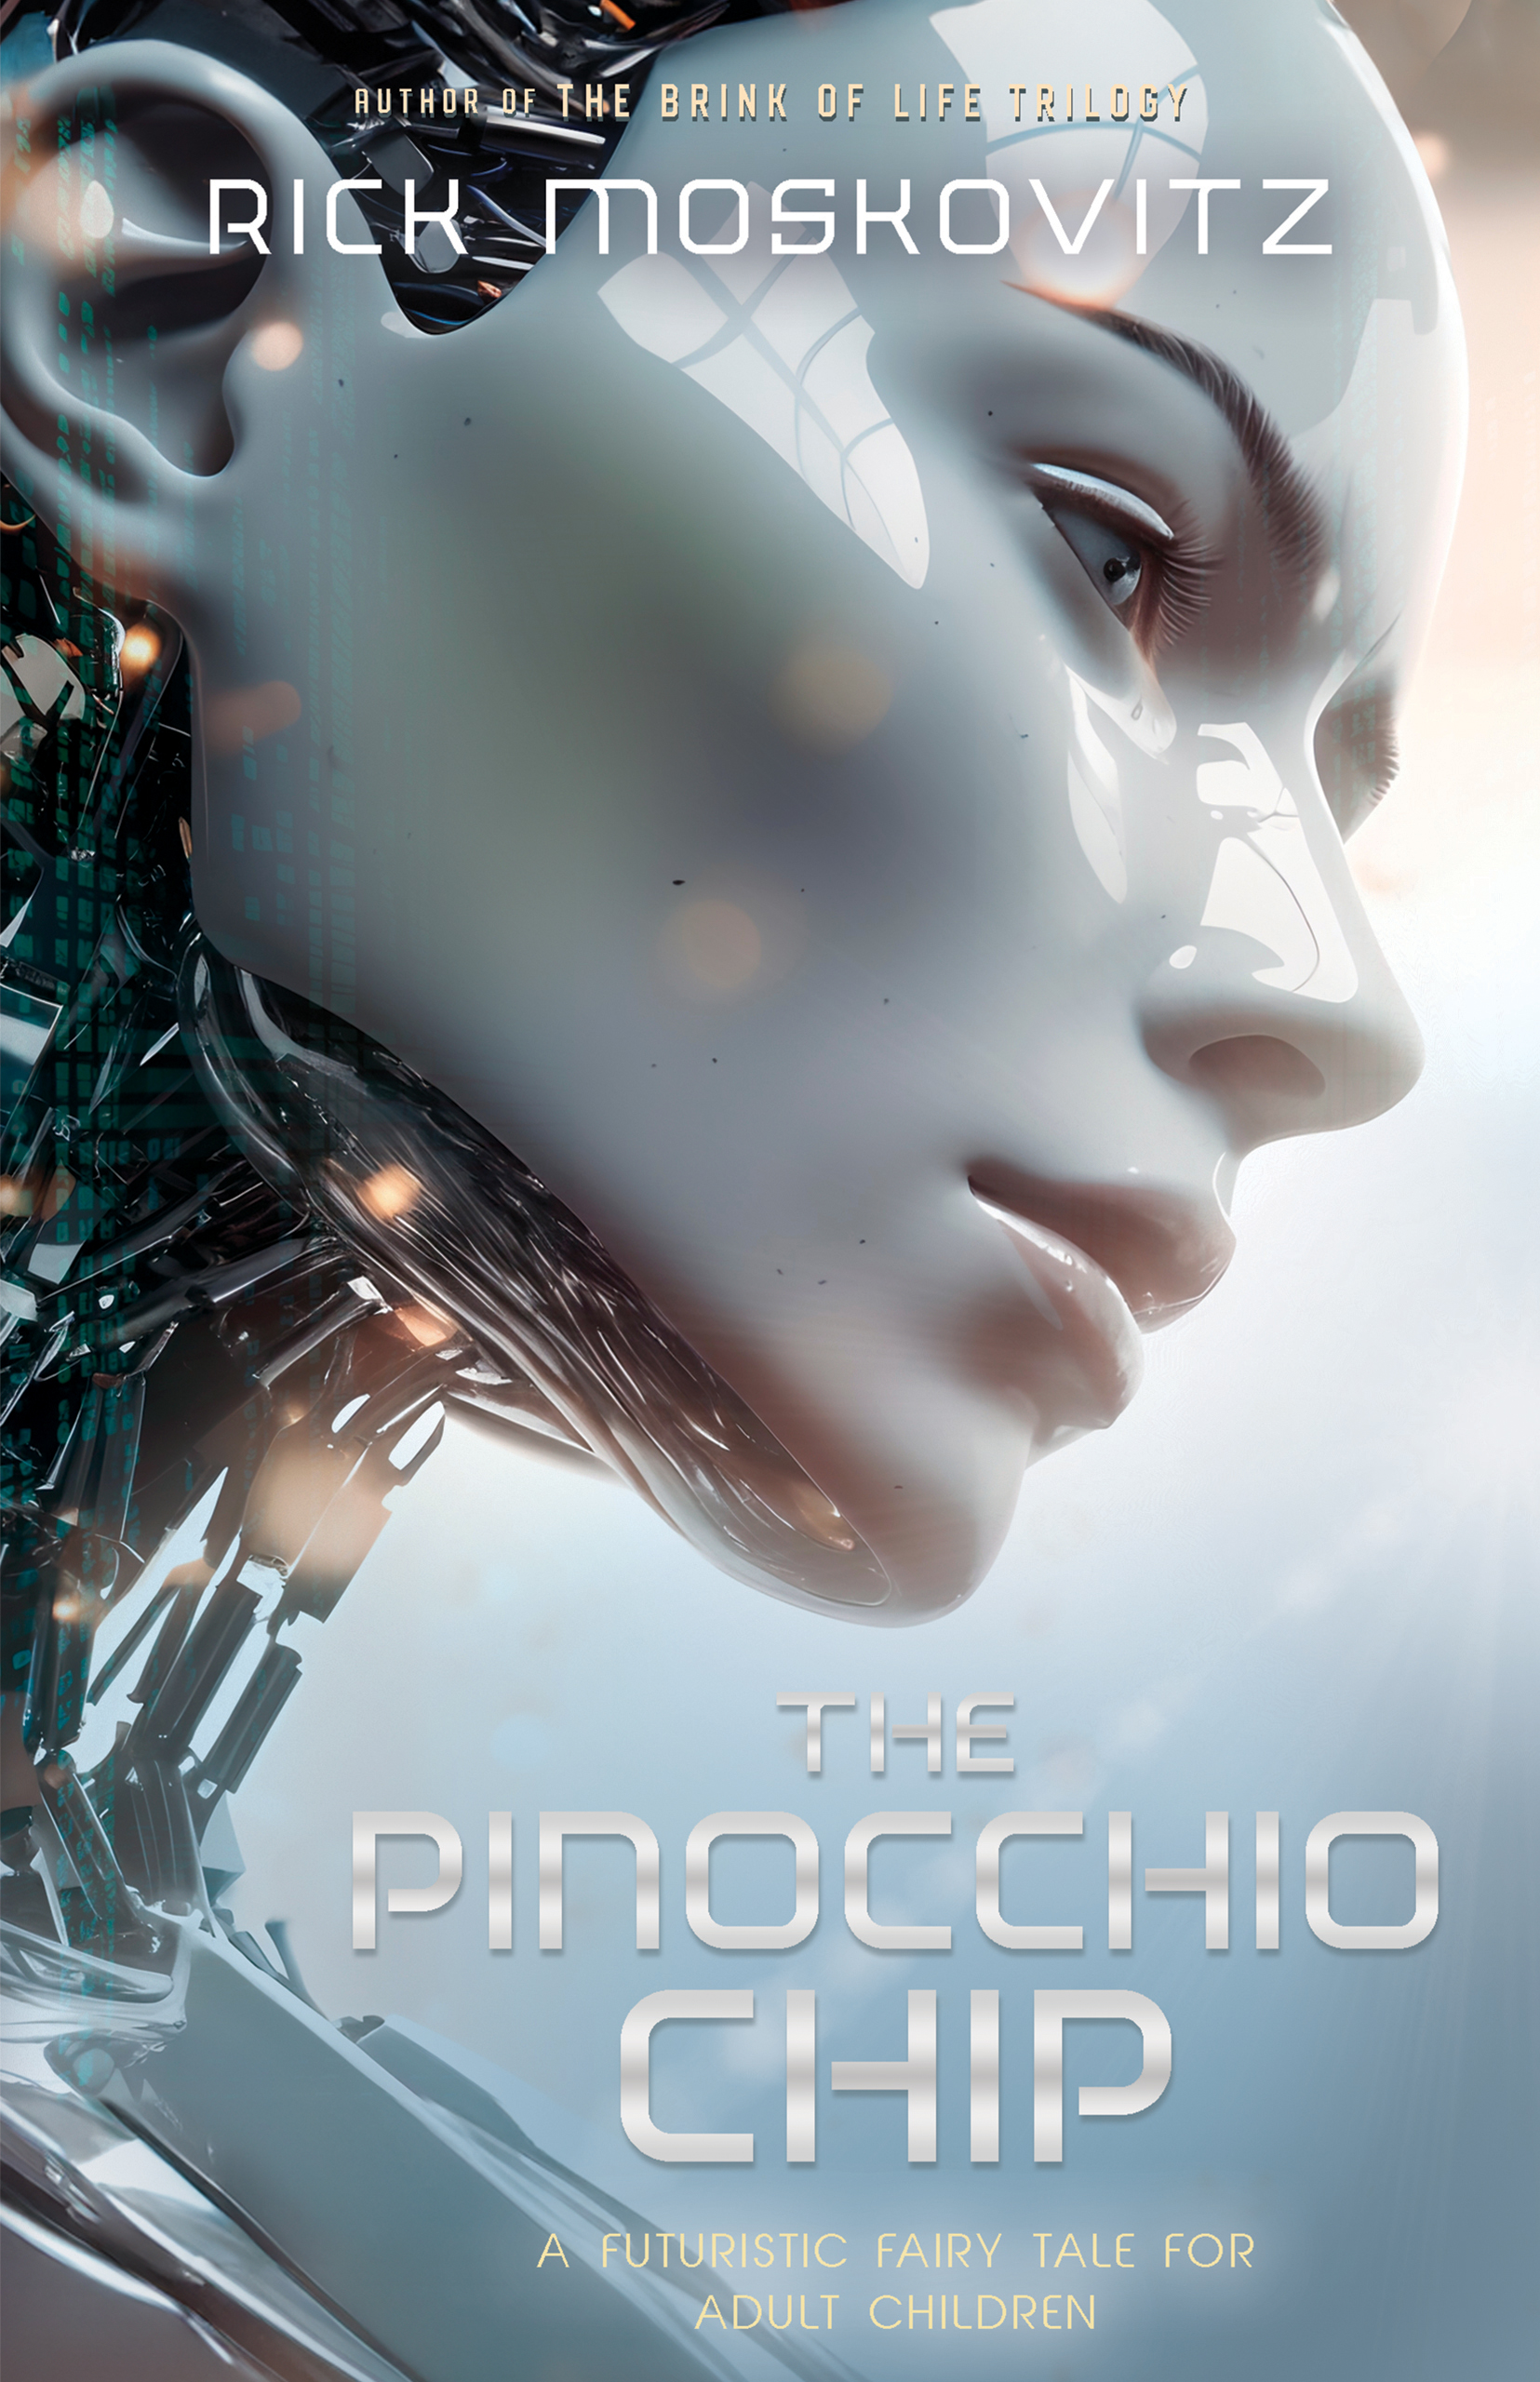 Part 13: Interview With Rick Moskovitz, Author of The Pinocchio Chip 